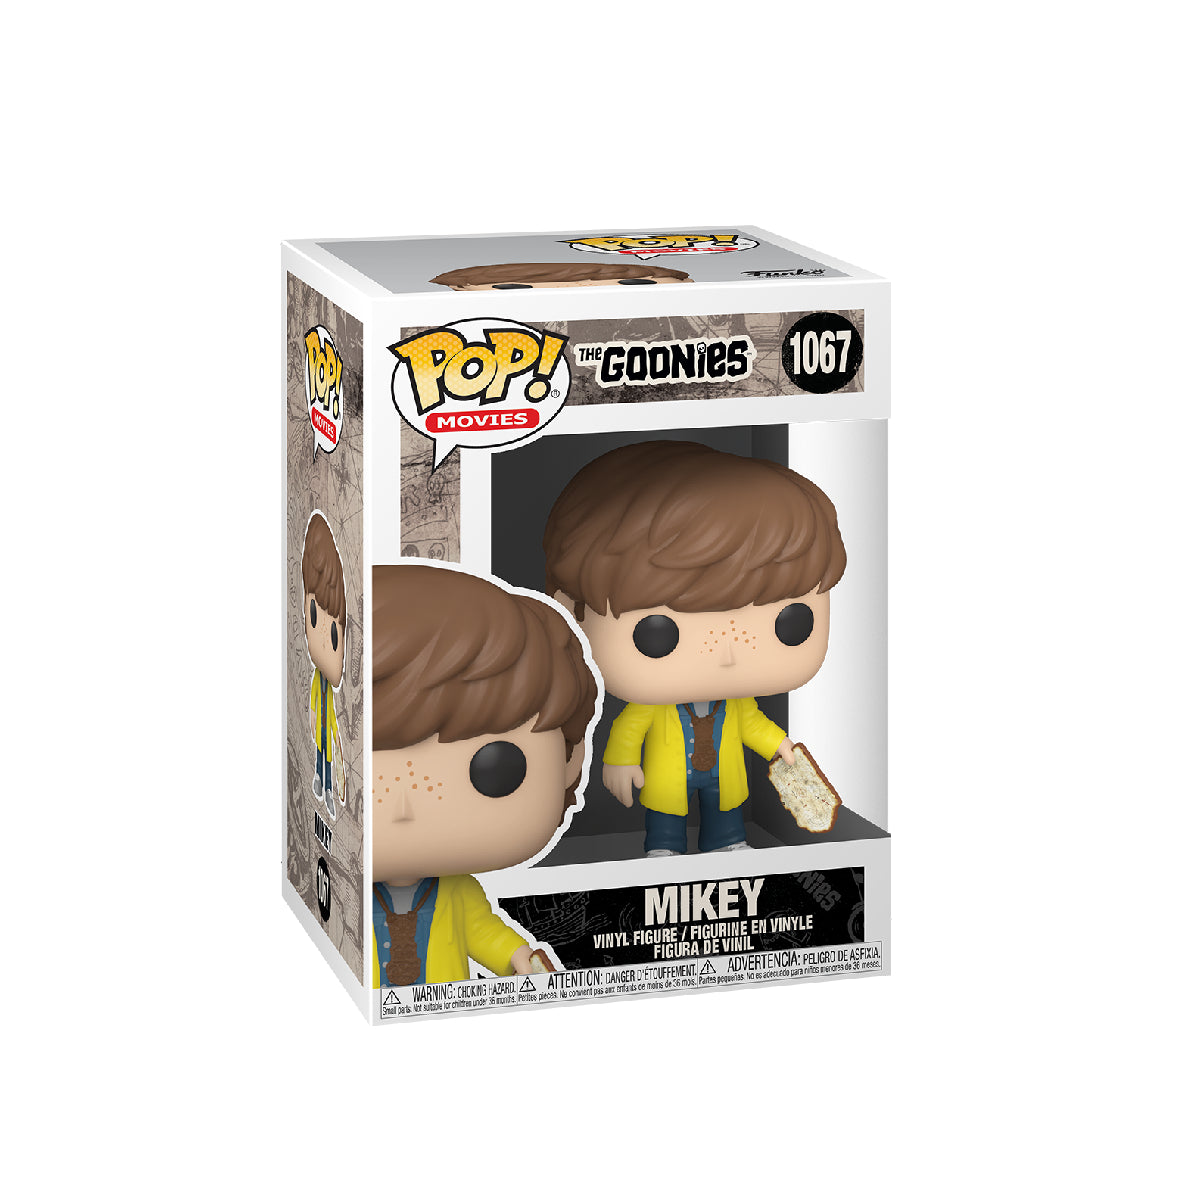 FUNKO POP MOVIES THE GOONIES MIKEY 1067